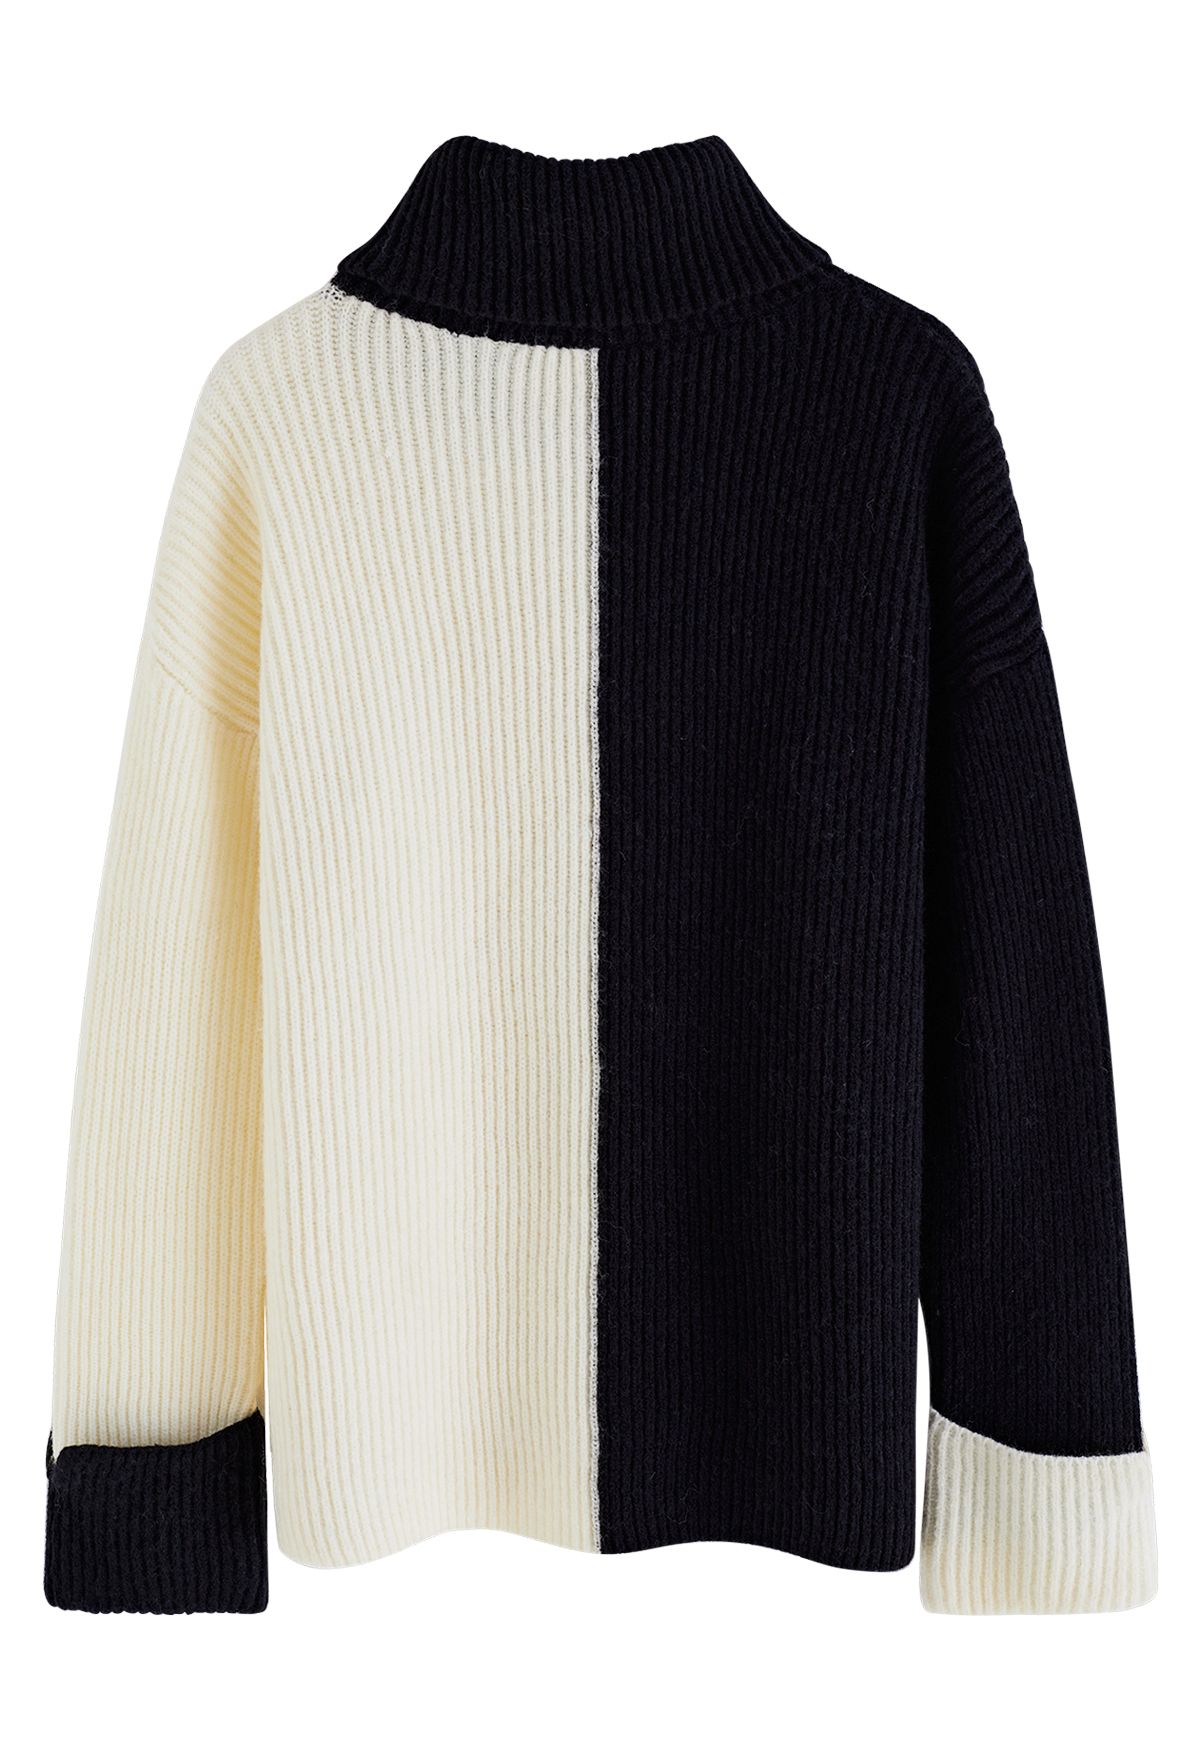 Turtleneck Two-Tone Turnback-Cuff Chunky Knit Sweater - Retro, Indie ...